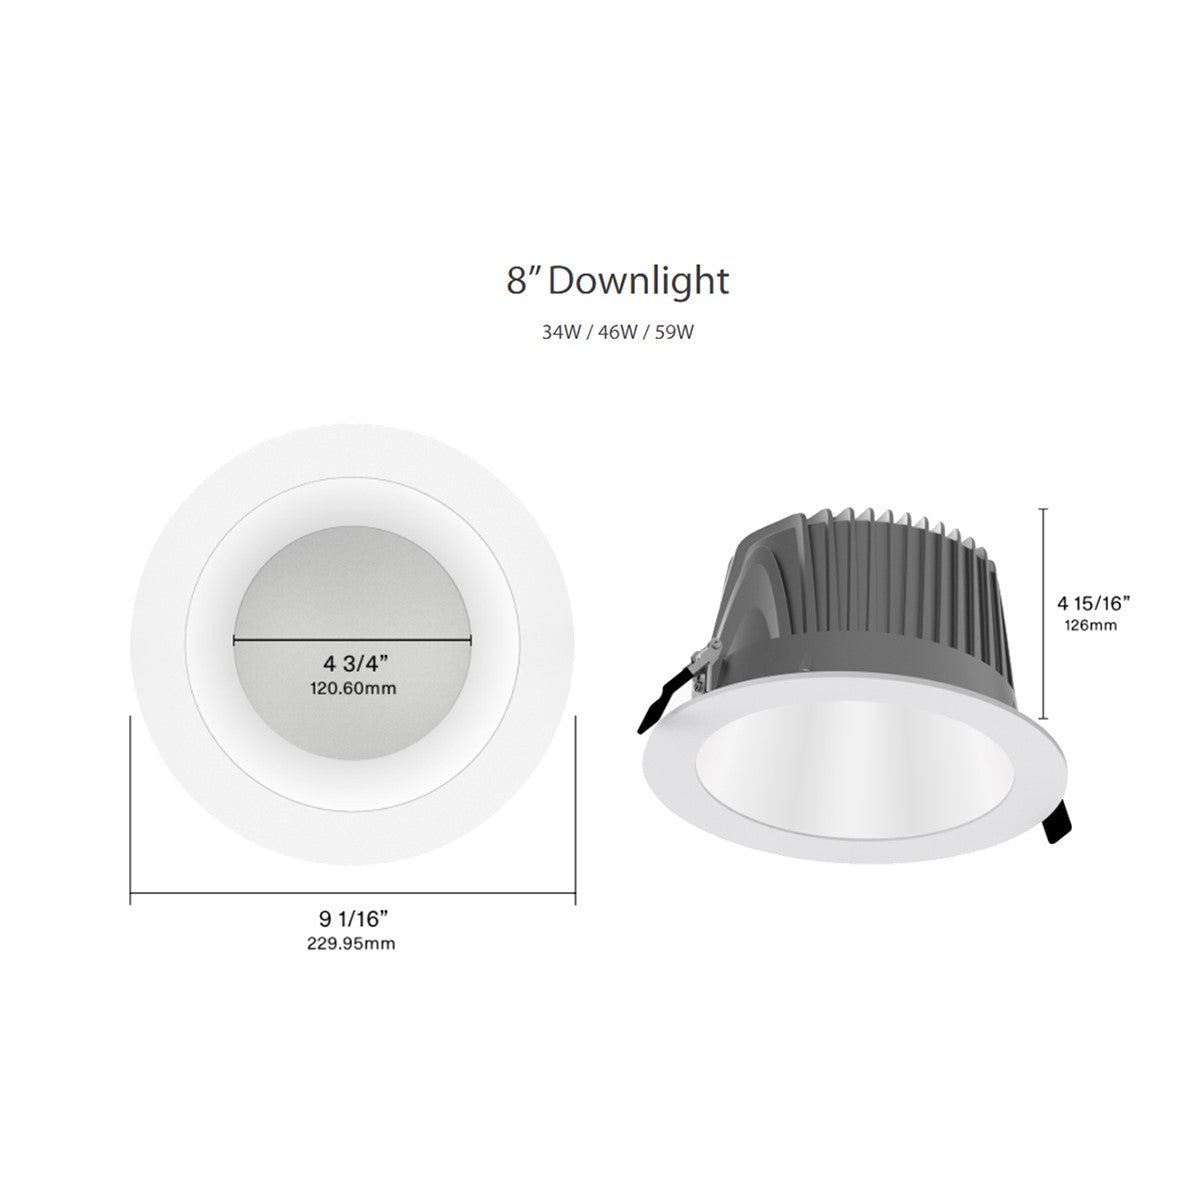 8 Inch LED Deep Regress Commercial Downlight, Field Adjustable 34/46/59W, 3000/4000/5000 Lumens, 30/35/40/50K, Smooth Trim, White Finish